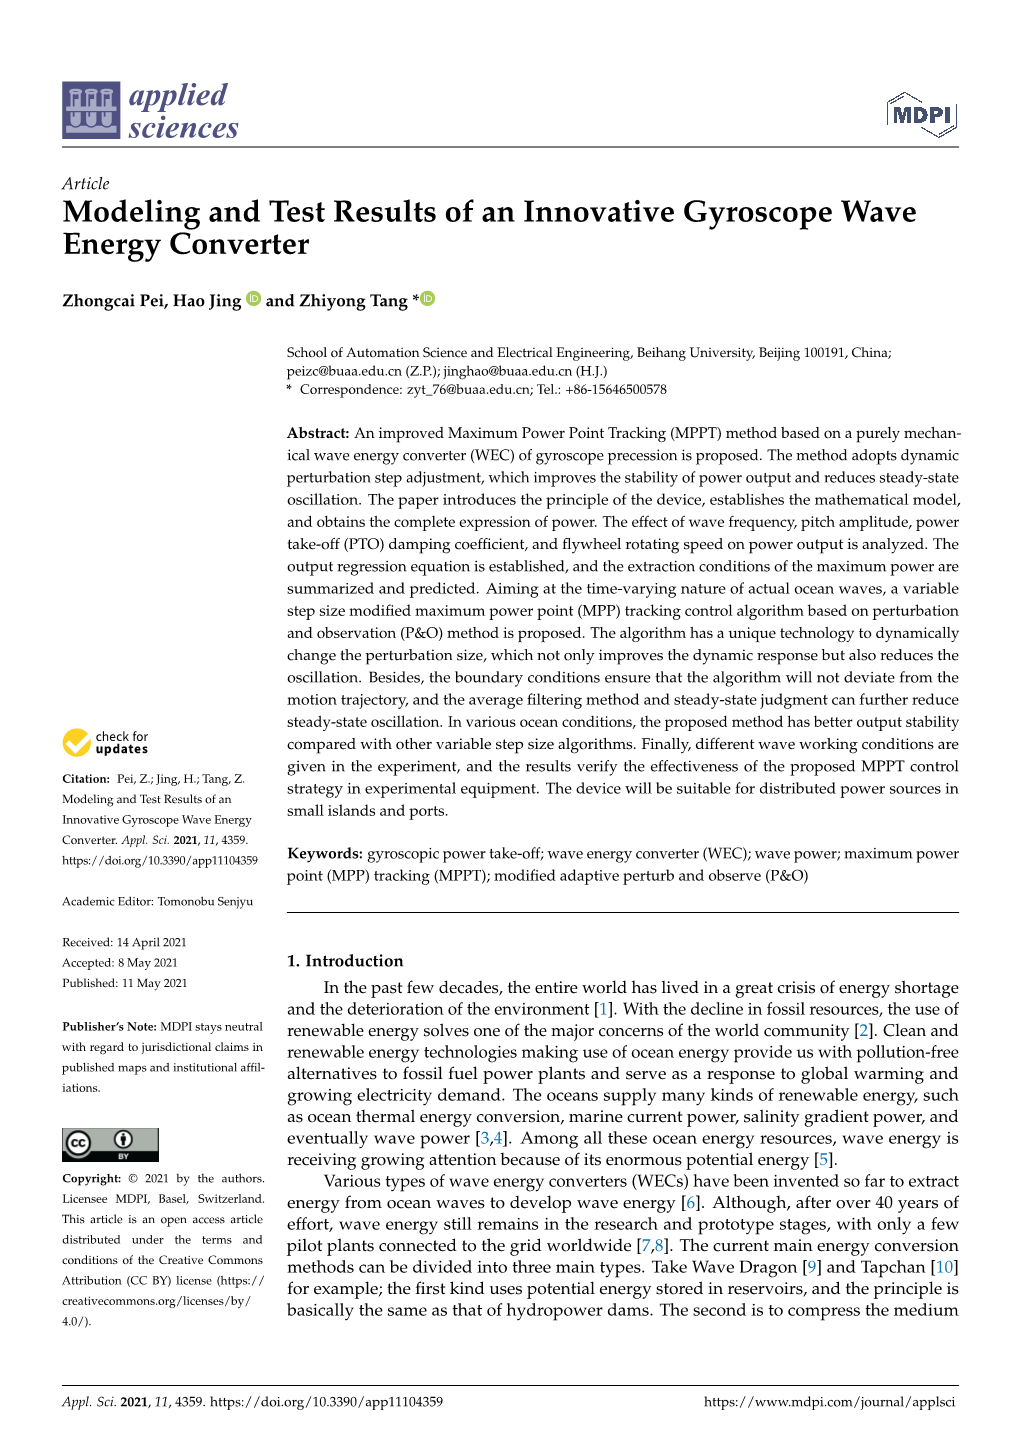 Modeling and Test Results of an Innovative Gyroscope Wave Energy Converter